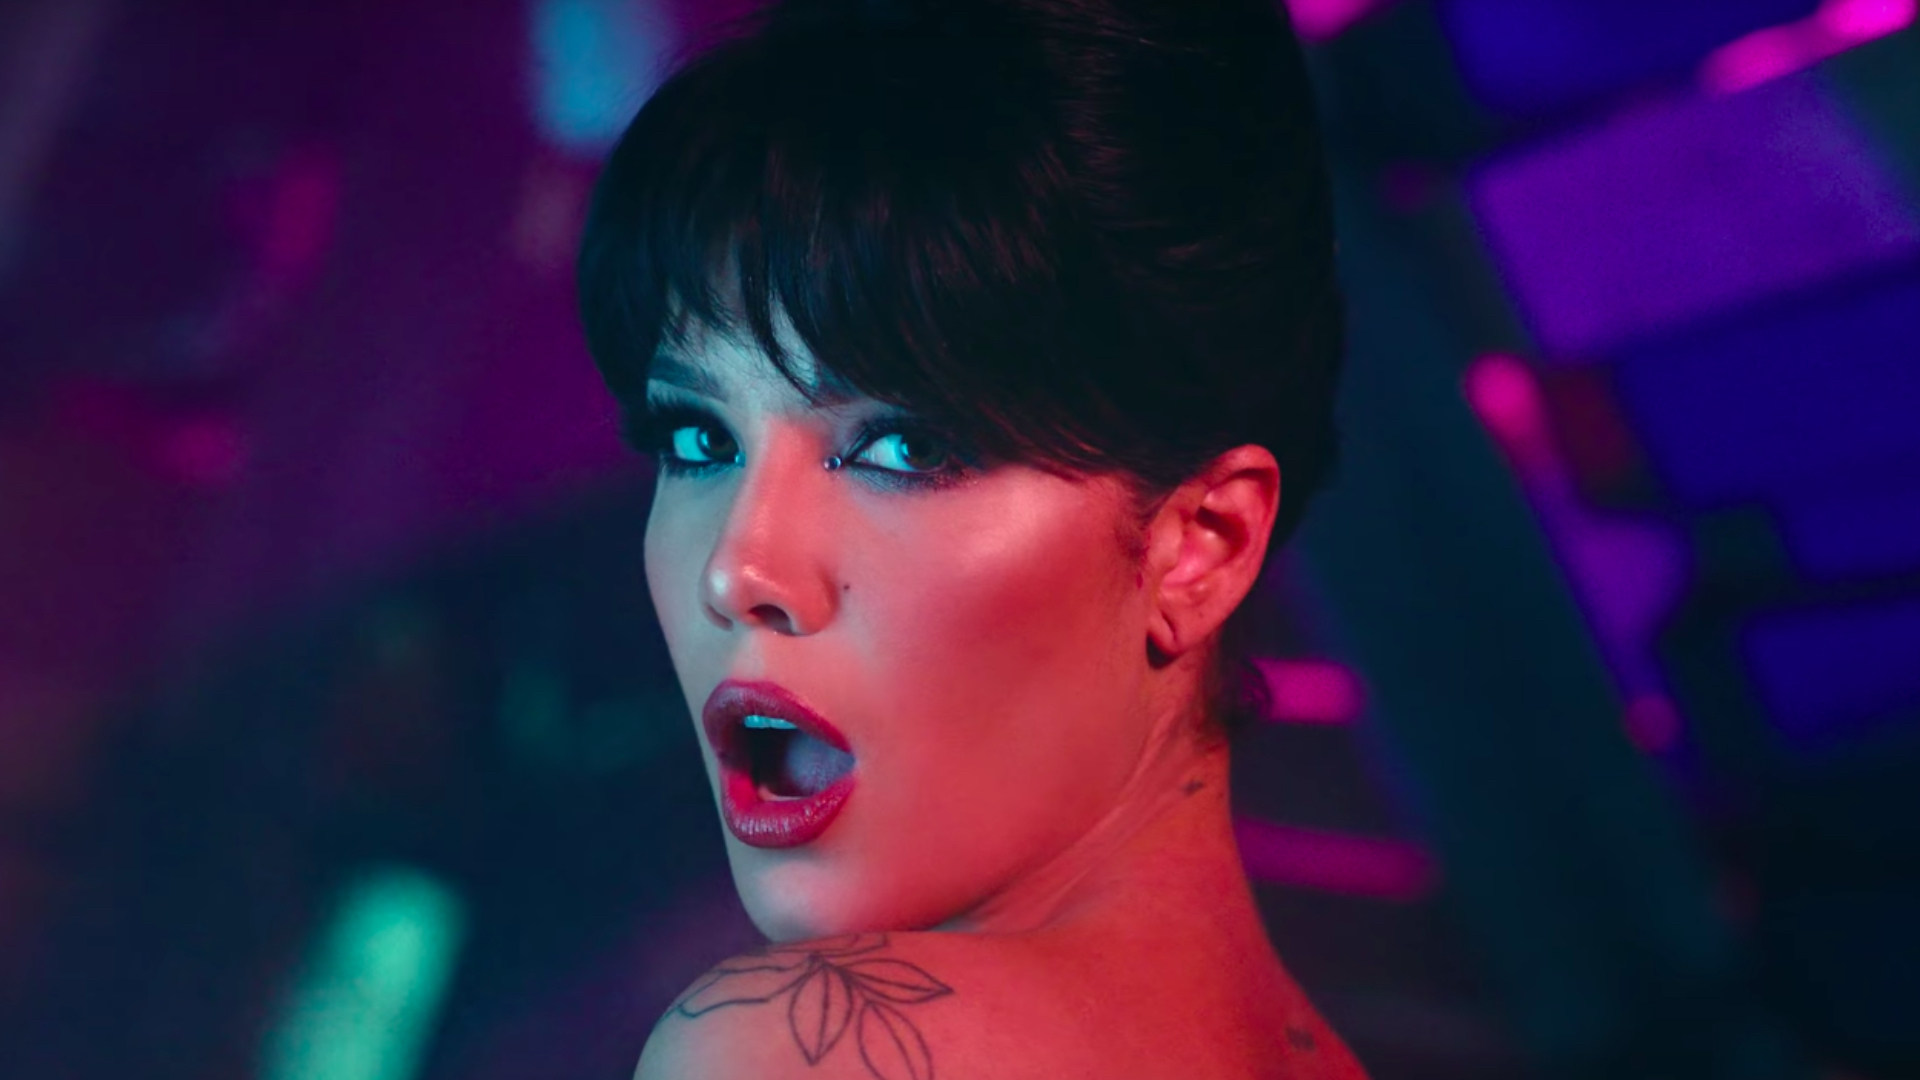 Halsey can’t release her new song until she fakes a viral moment